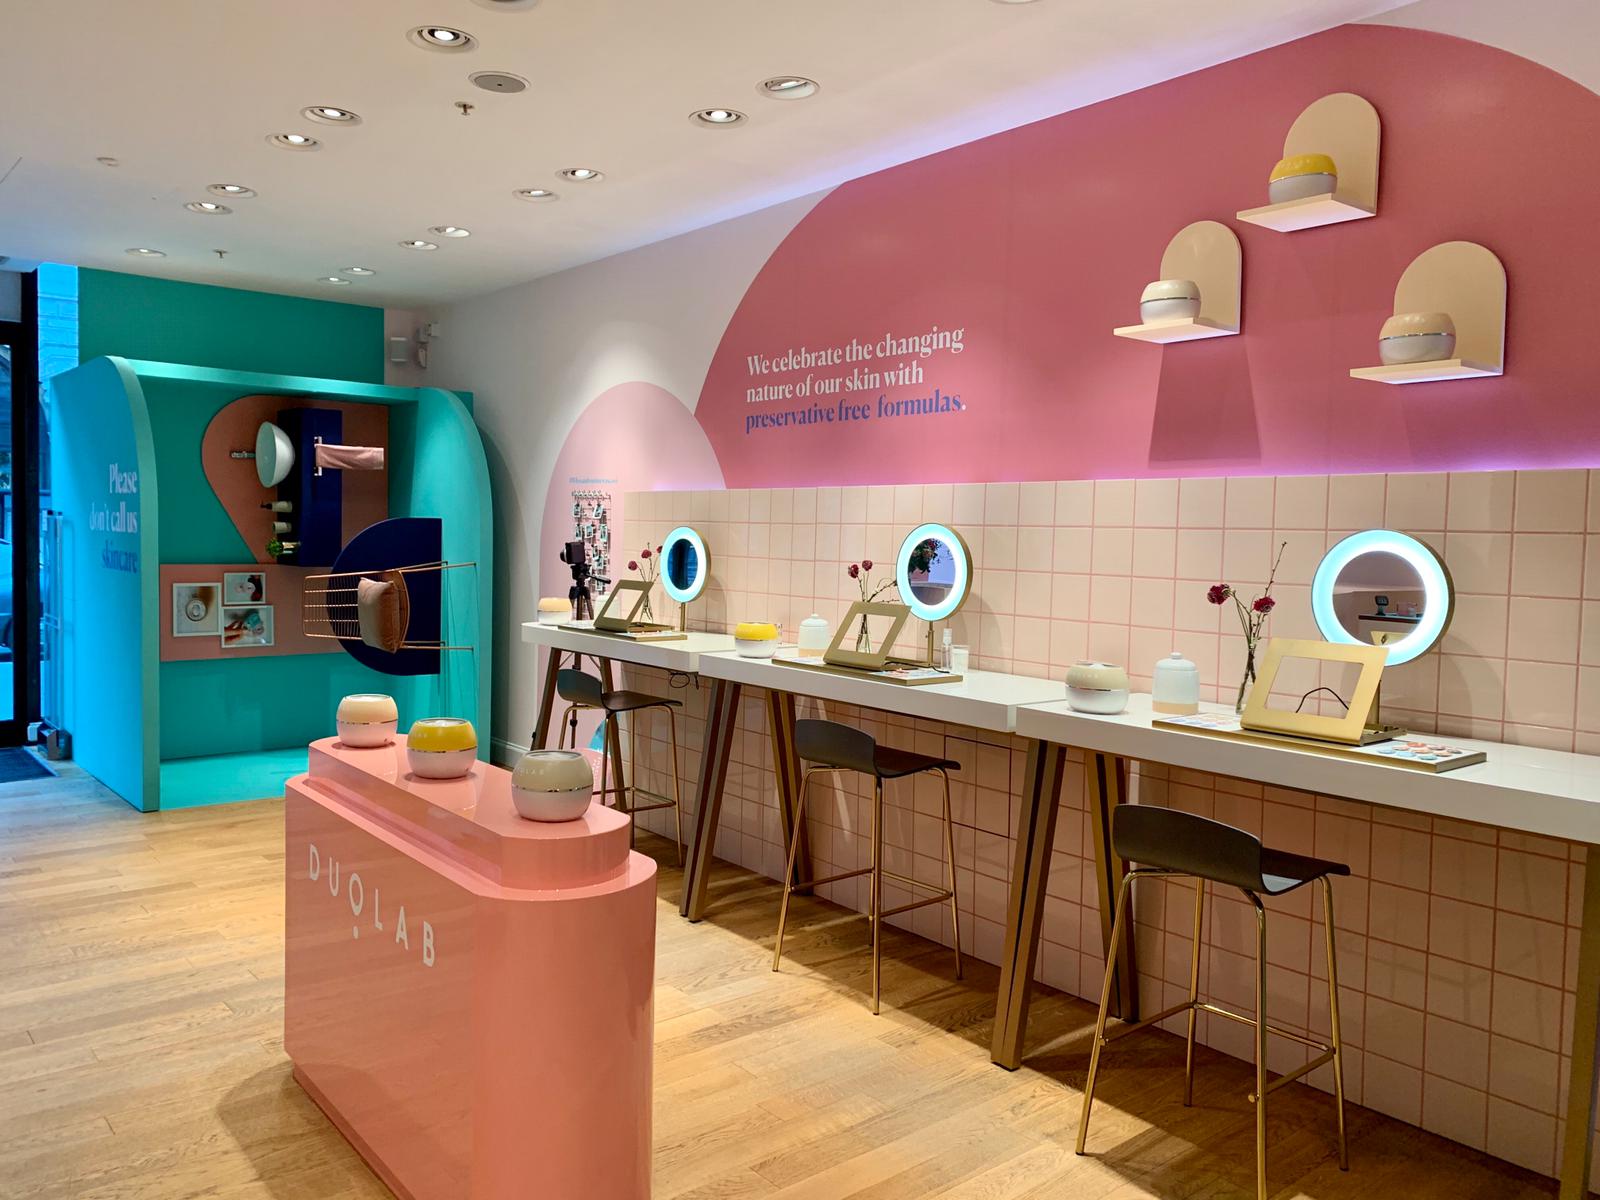 Your Customers Want Experiential Retail: How To Deliver a Memorable Retail Experience